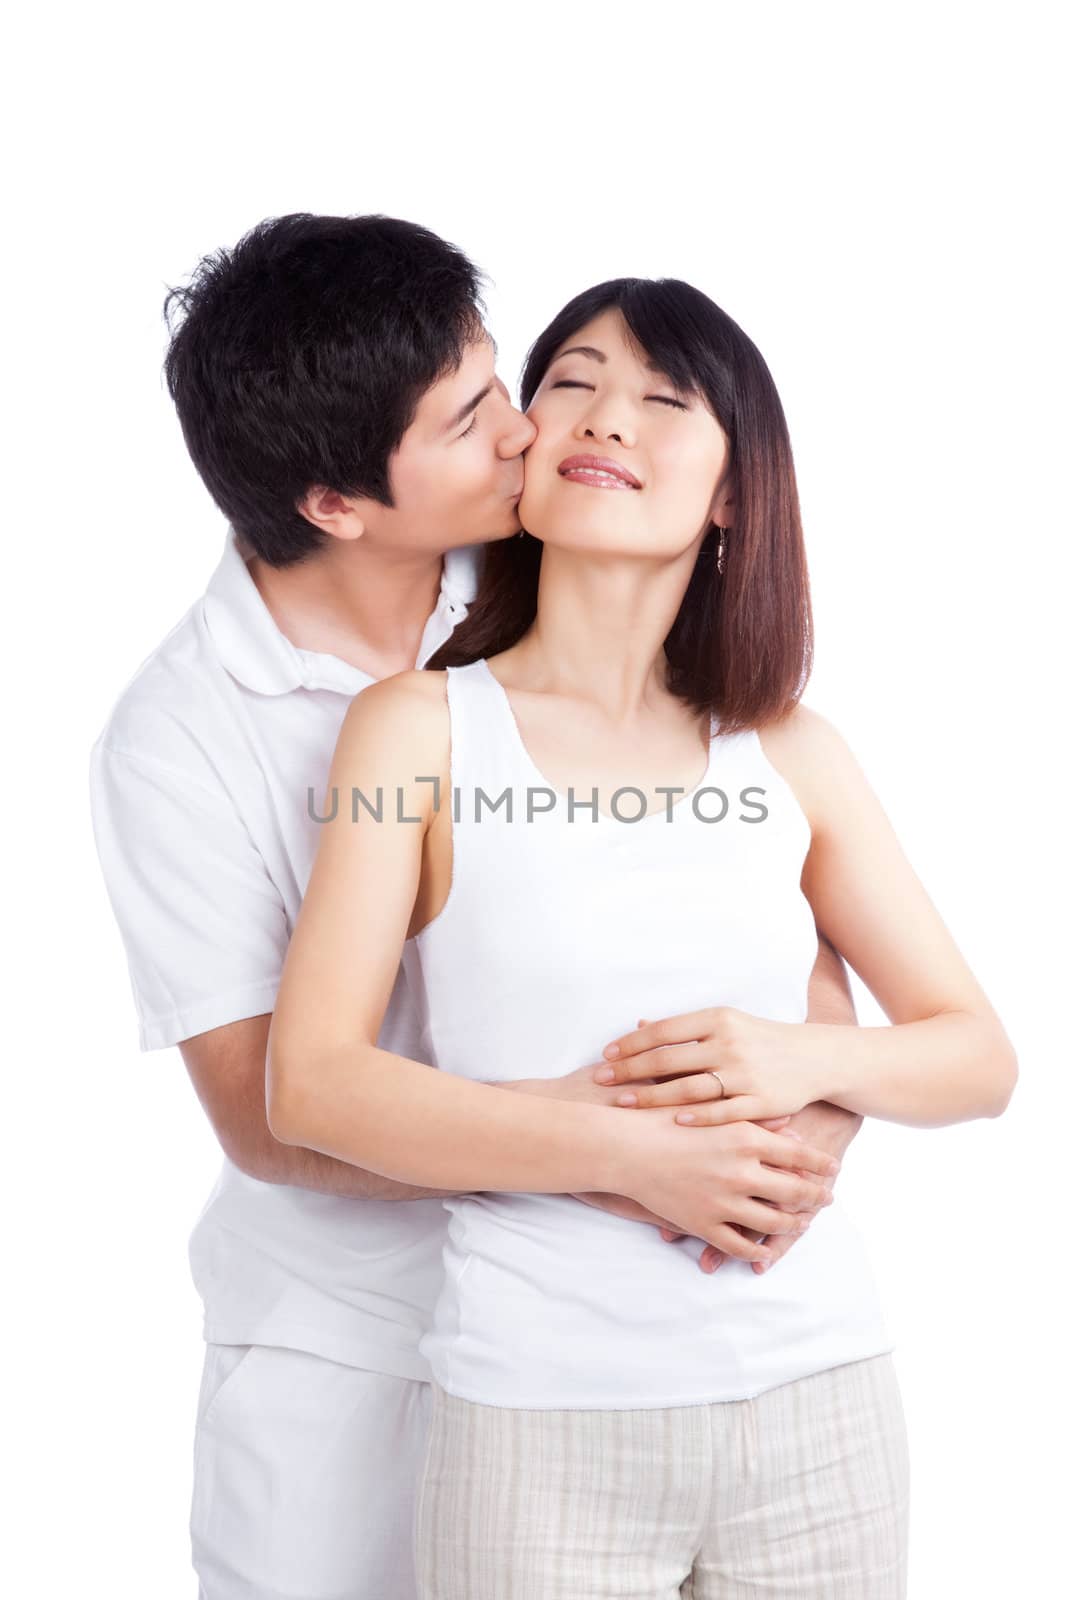 Portrait of man kissing woman on cheek isolated on white background.